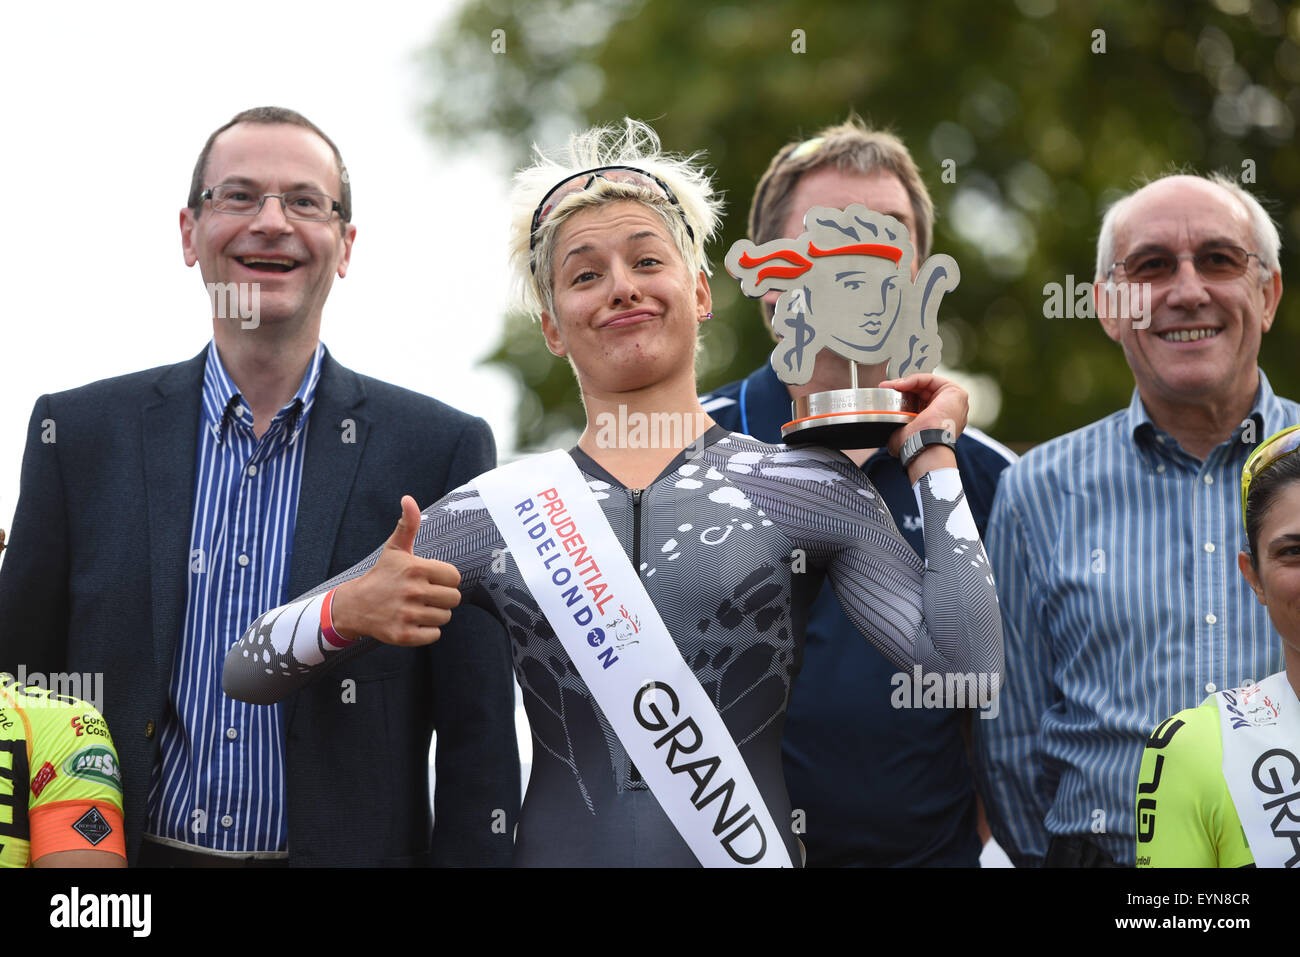 London, UK. 1st August, 2015. Barbara Guarischi (Velocio Sports) is seen on the podium following her win at the Prudential RideLondon Grand Prix at The Mall, London, United Kingdom on 1 August 2015. The race, which started at Horse Guards Parade and finished on The Mall, featured many of the world's top female professional cyclists. Credit:  Andrew Peat/Alamy Live News Stock Photo